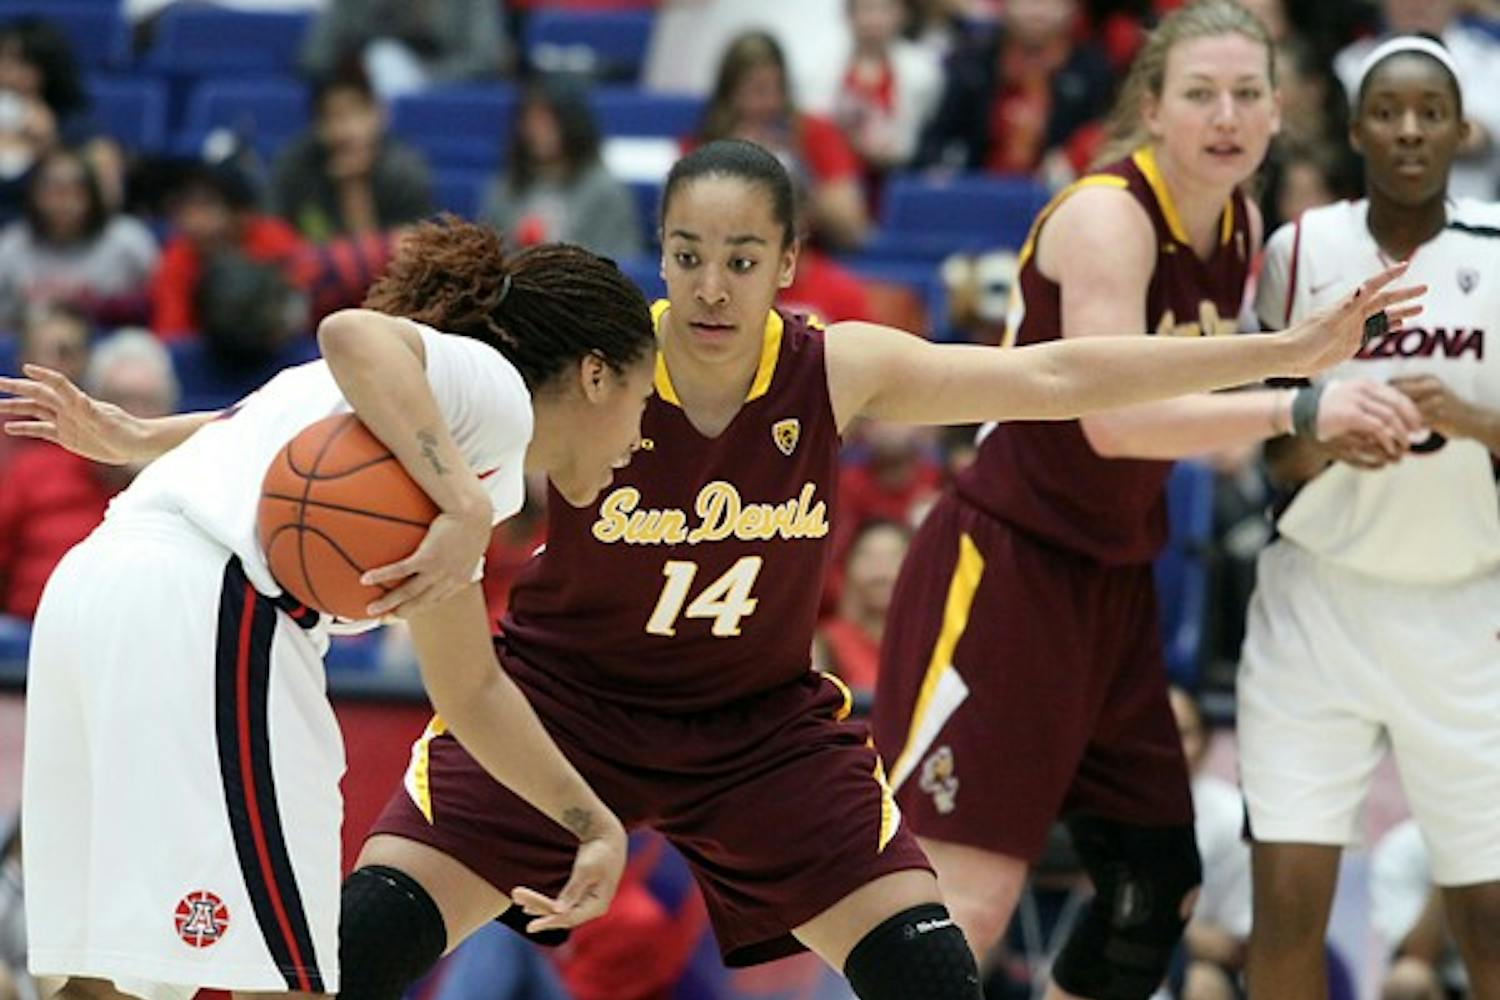 No dice: ASU freshman guard Adrianne Thomas defends during the Wildcats’ 73-61 victory on Sunday. The Sun Devils trailed for most of the game but were unable to mount a comeback in the game’s final minutes. (Photo Courtesy of Steve Rodriguez)